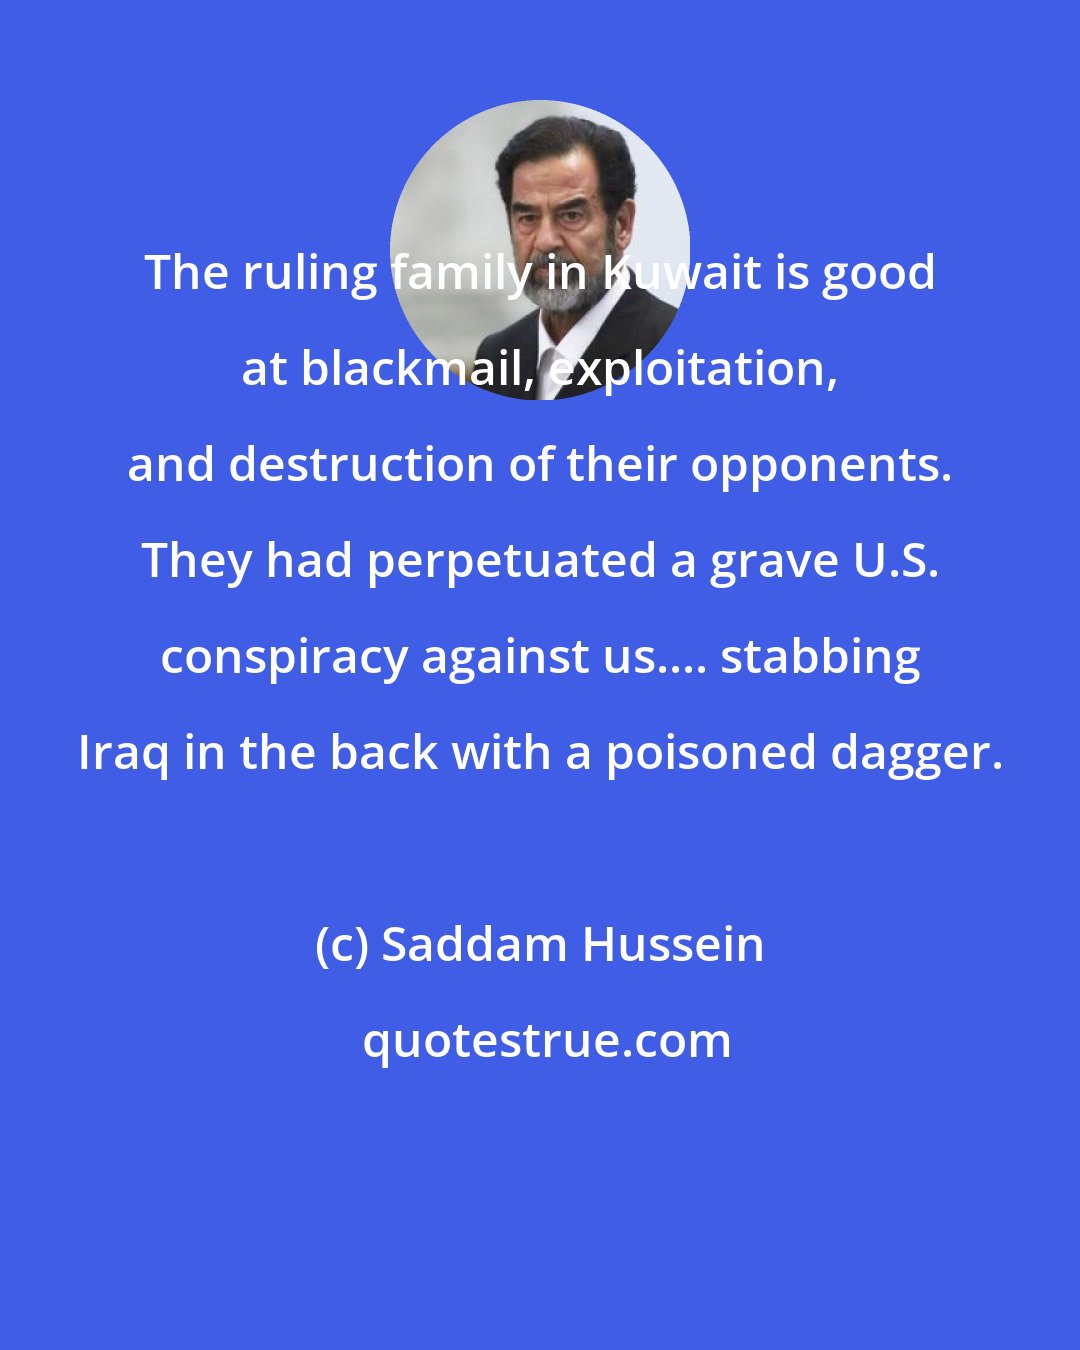 Saddam Hussein: The ruling family in Kuwait is good at blackmail, exploitation, and destruction of their opponents. They had perpetuated a grave U.S. conspiracy against us.... stabbing Iraq in the back with a poisoned dagger.